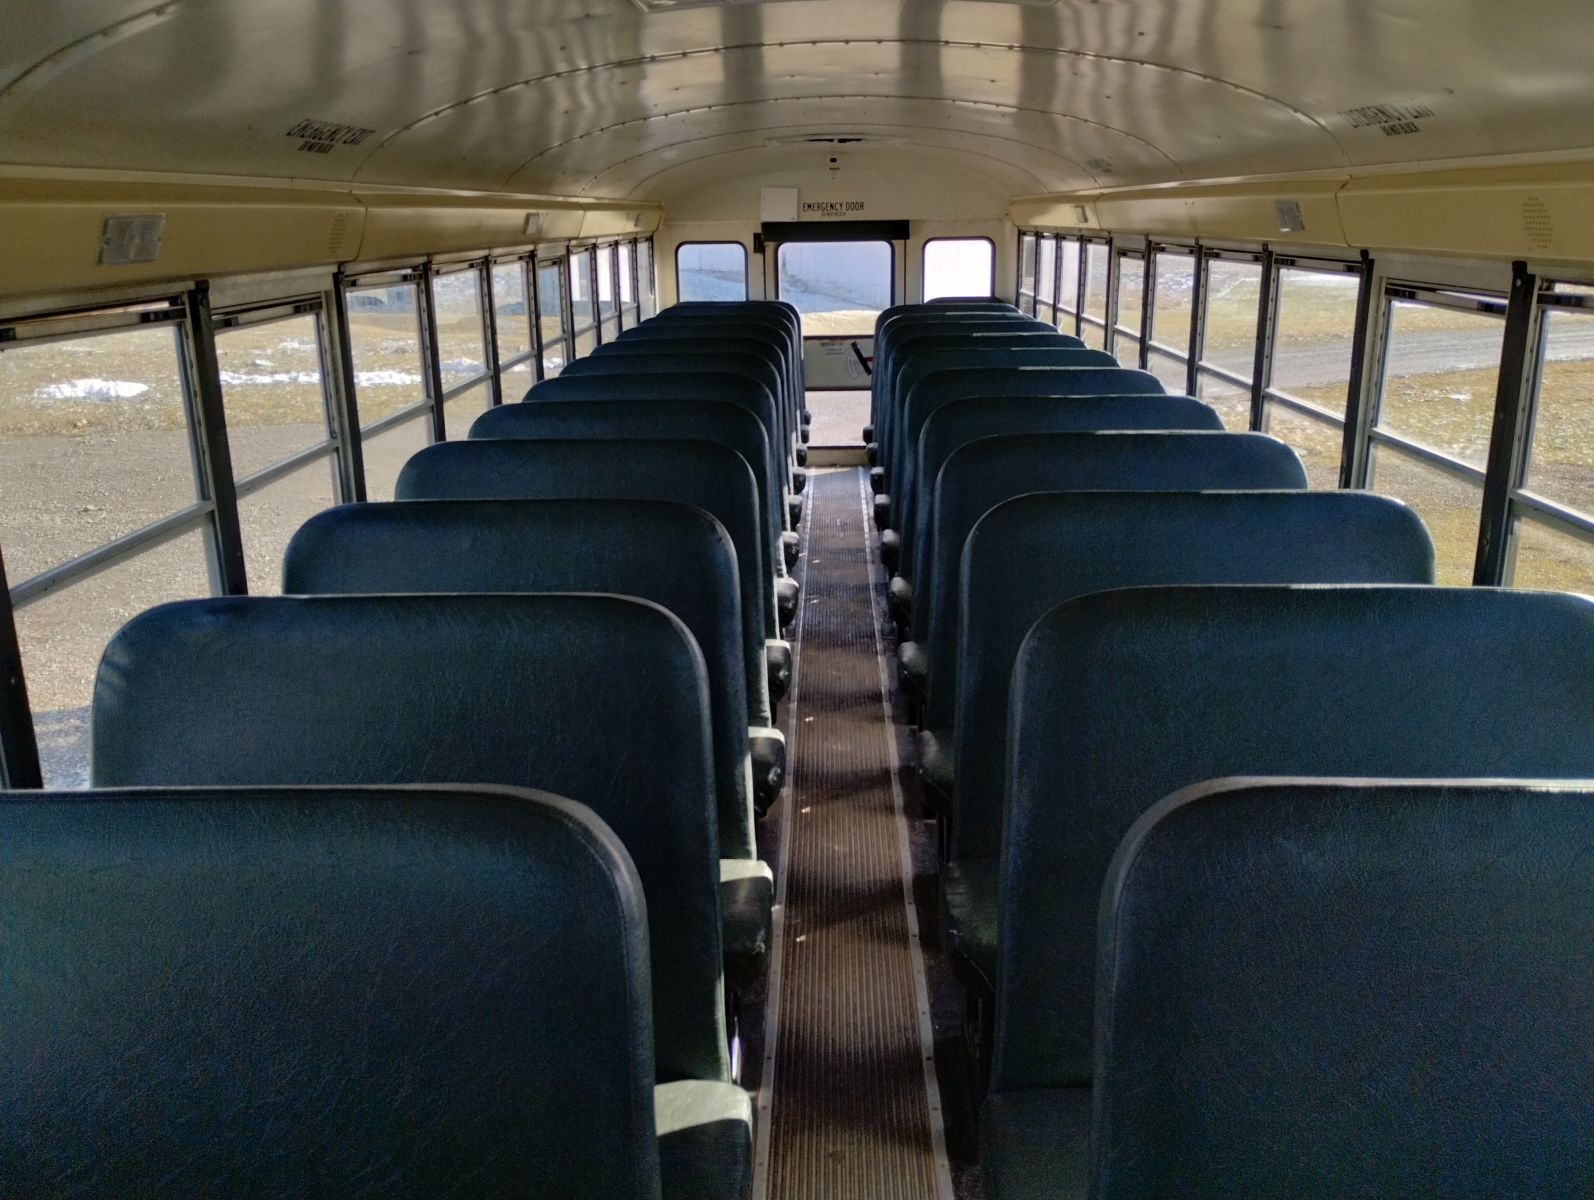 An image of the seating in a school bus.